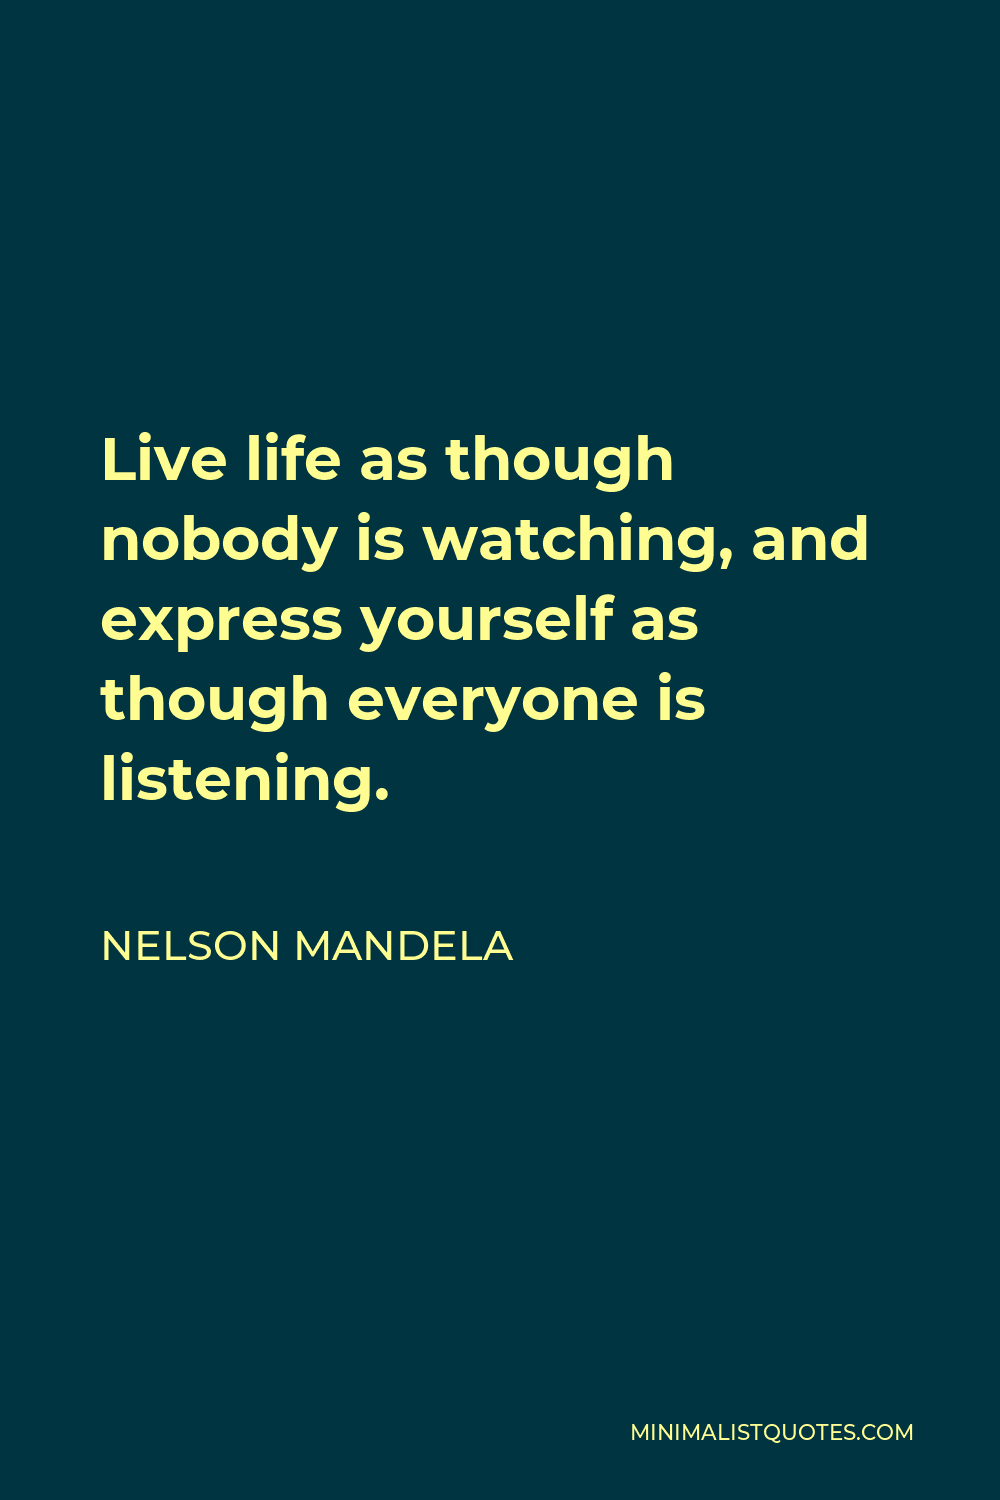 Nelson Mandela Quote - Live life as though nobody is watching, and express yourself as though everyone is listening.